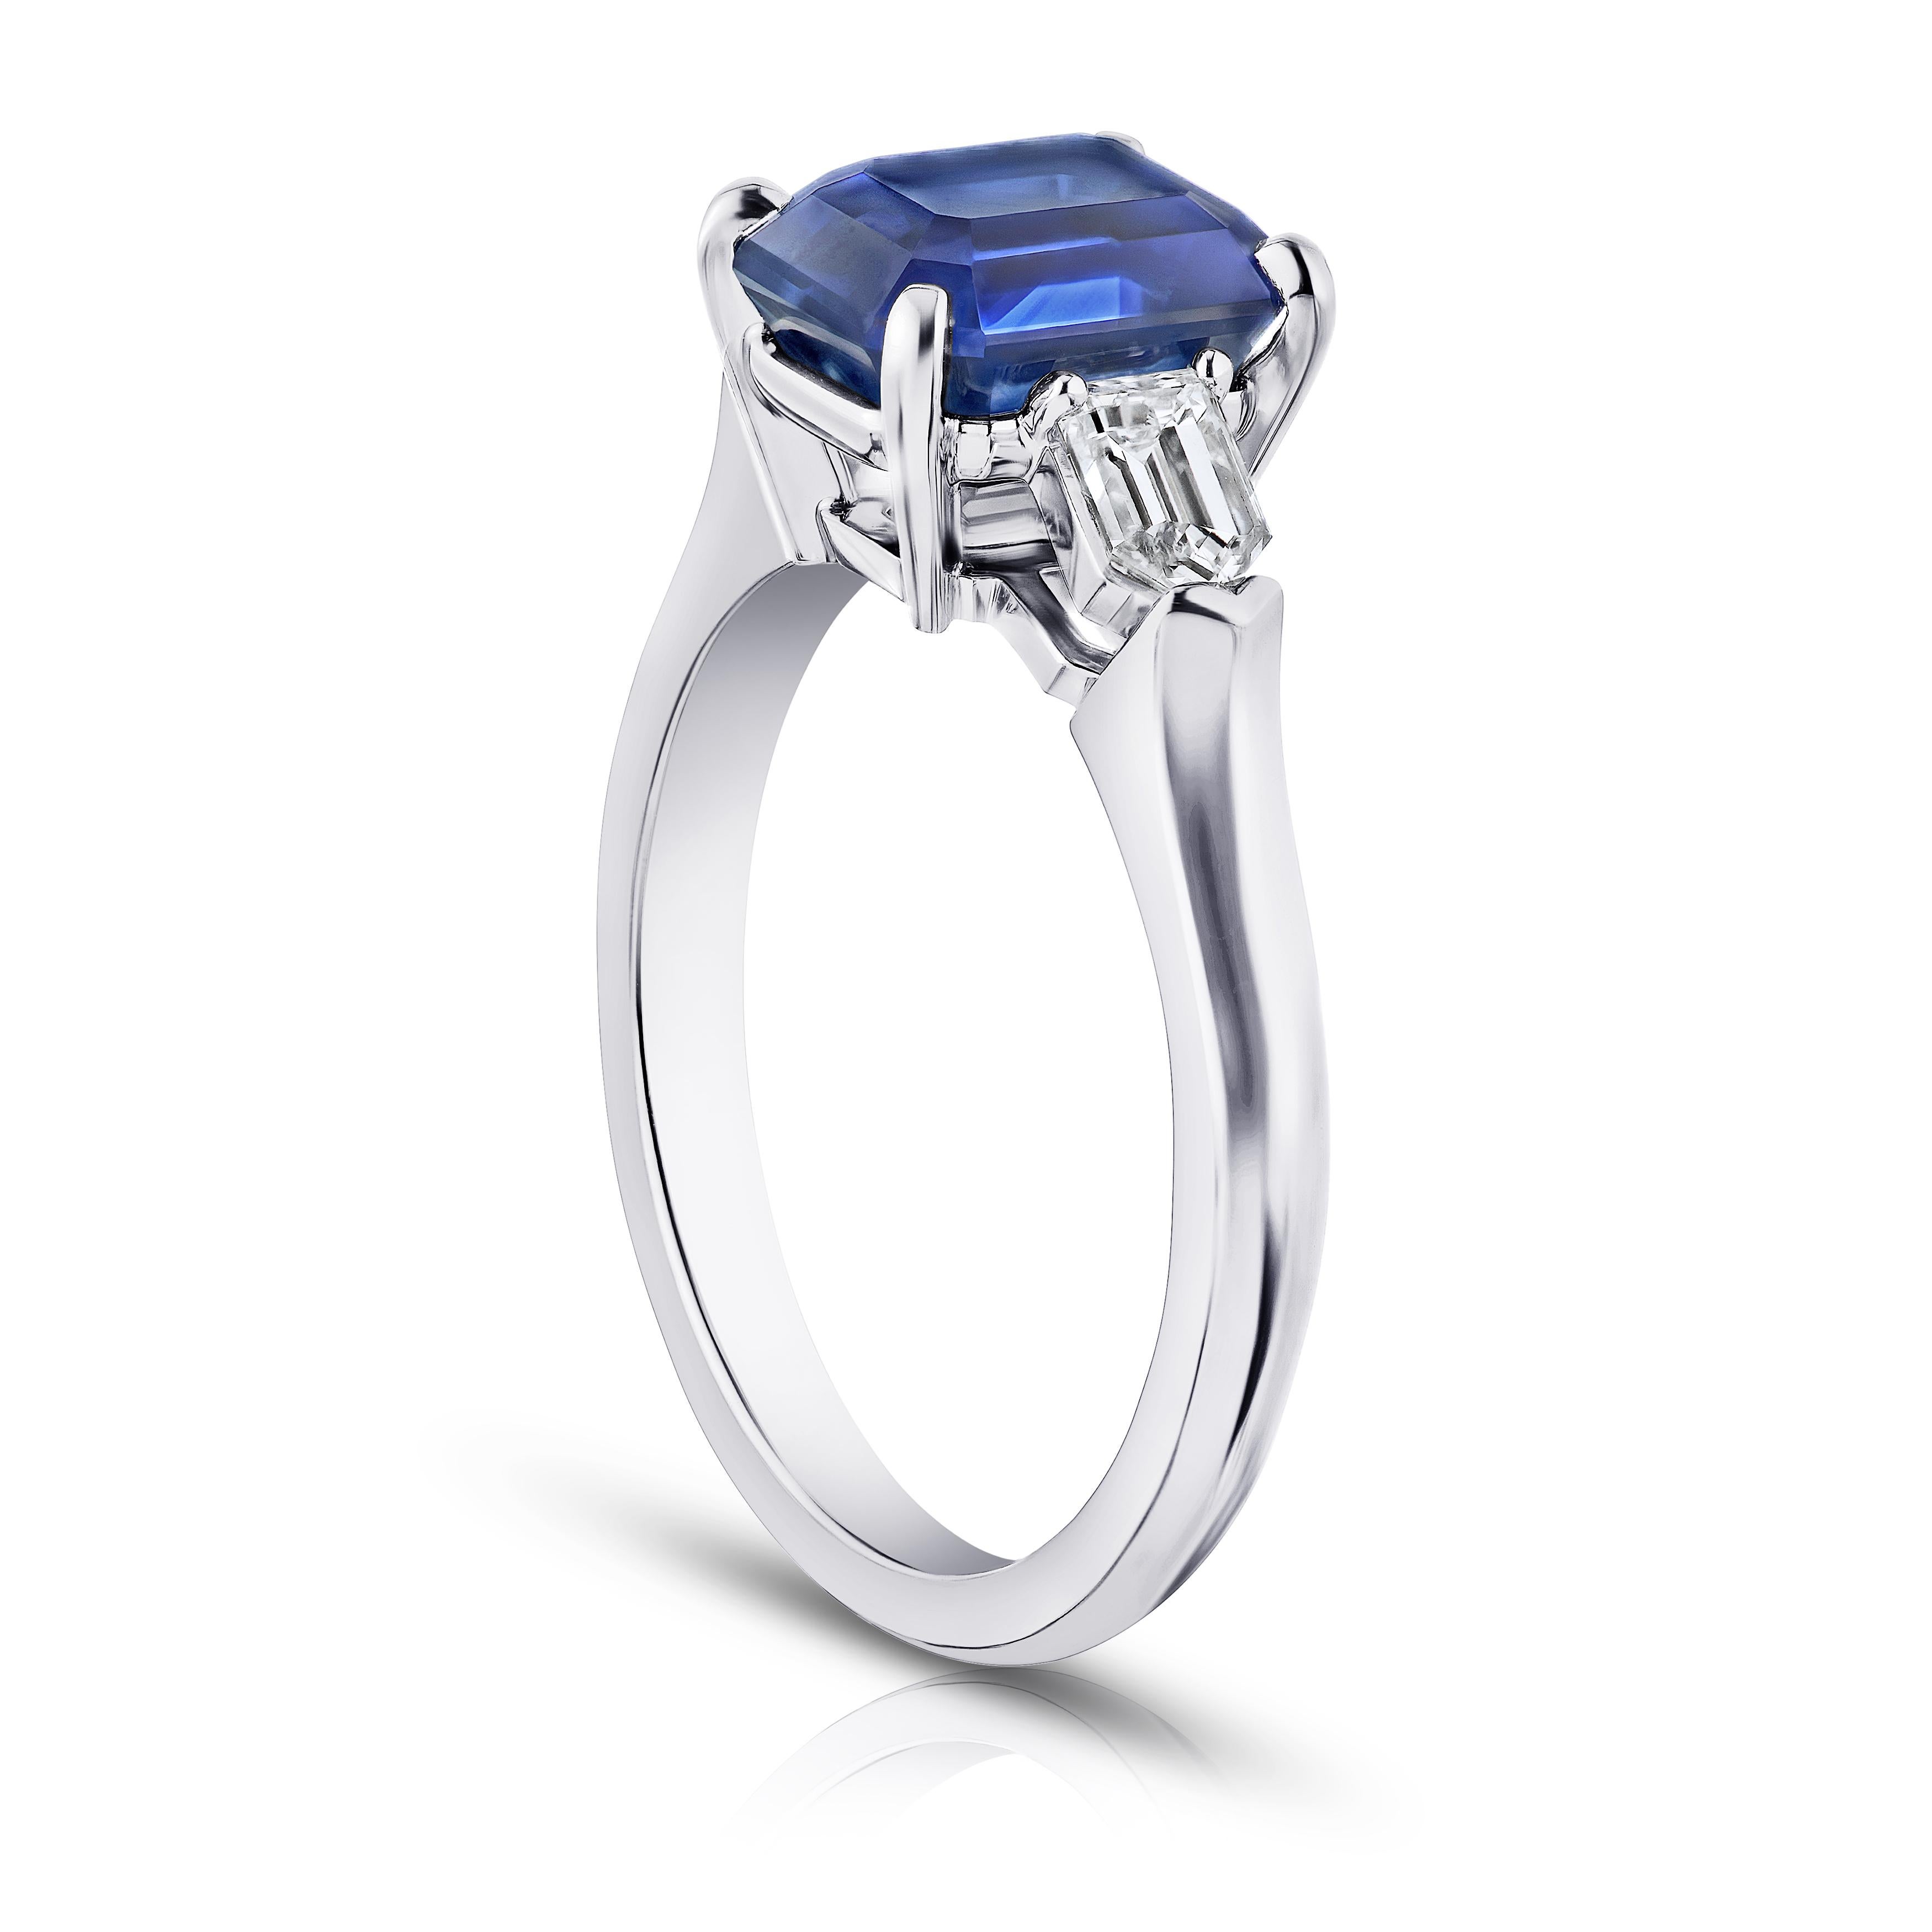 3.72 carat emerald cut blue sapphire with straight bullet diamonds .52 carats set in a platinum ring. This ring is currently a size 7.  We will resize to your finger size without charge.
